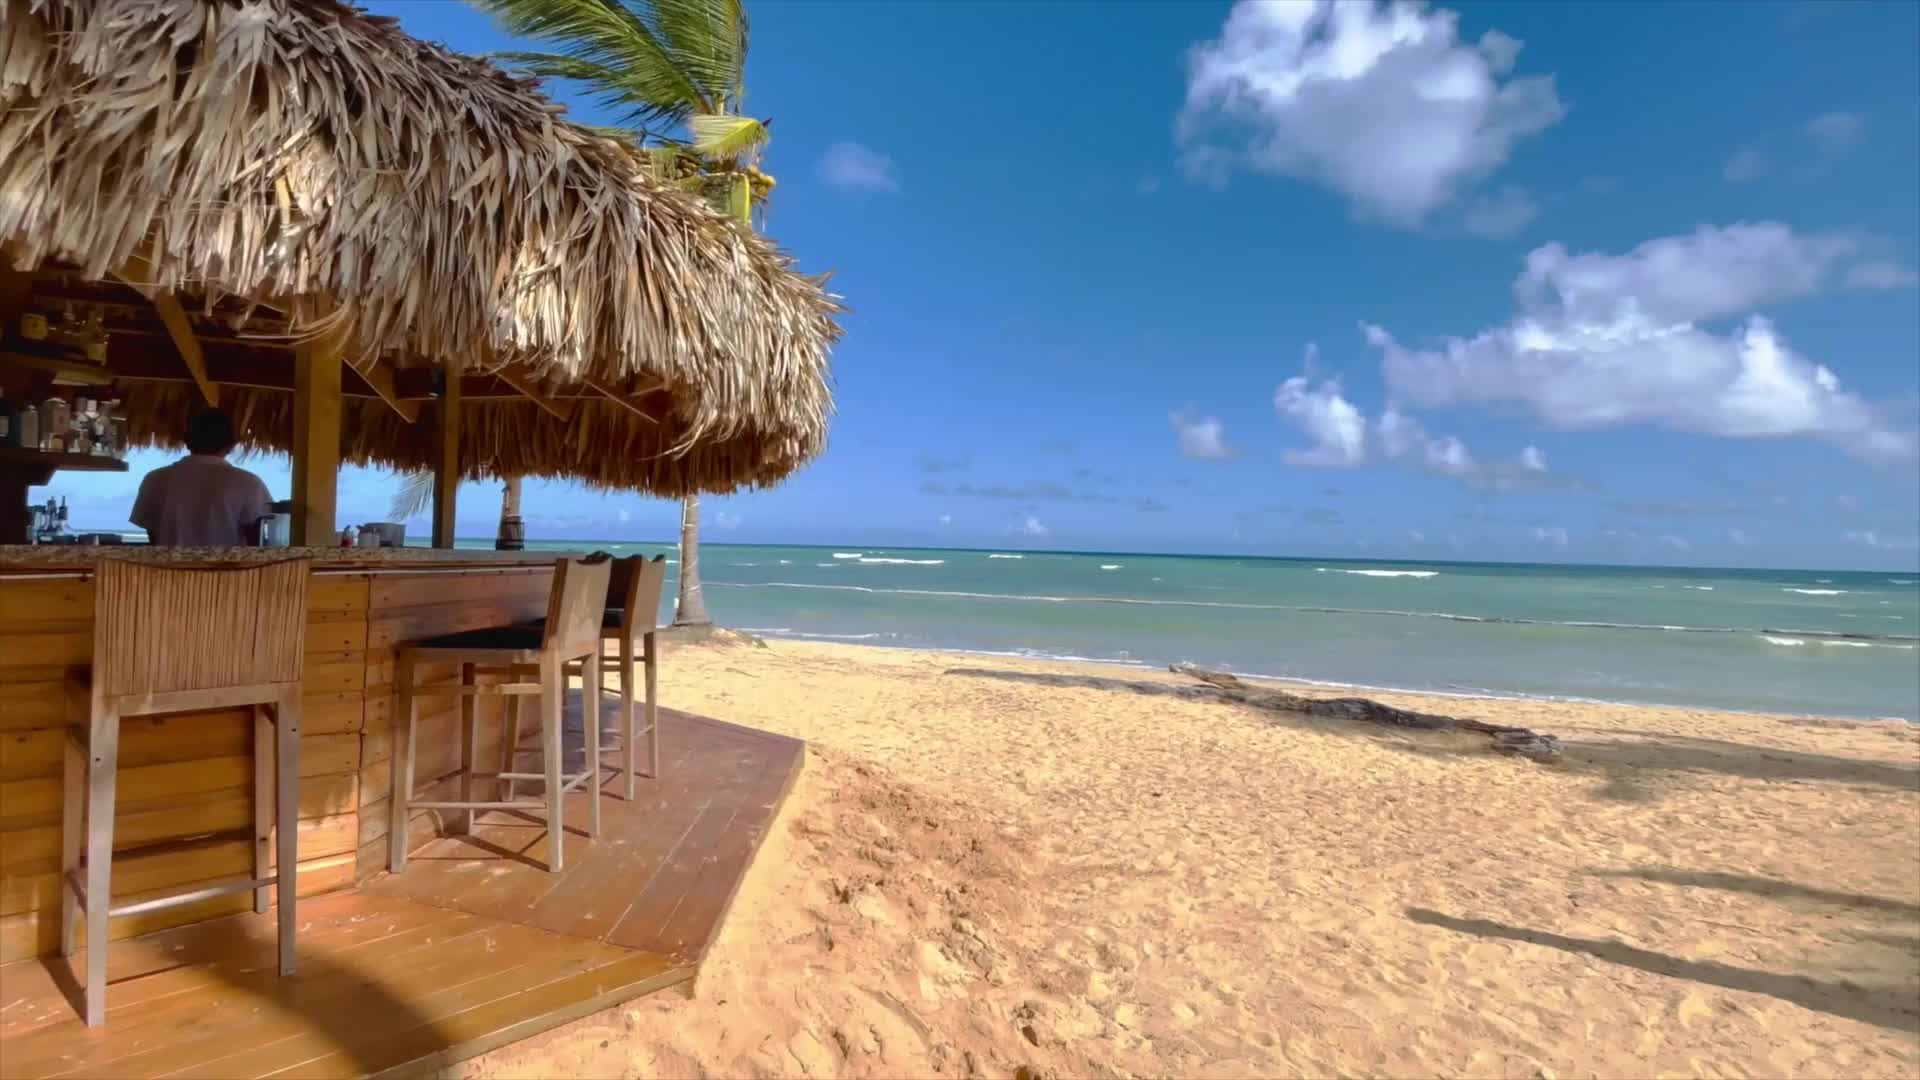 A promotional video showing the buildings, besen and service at Beach Apartamentos at Playa Palmera Beach Resort. 